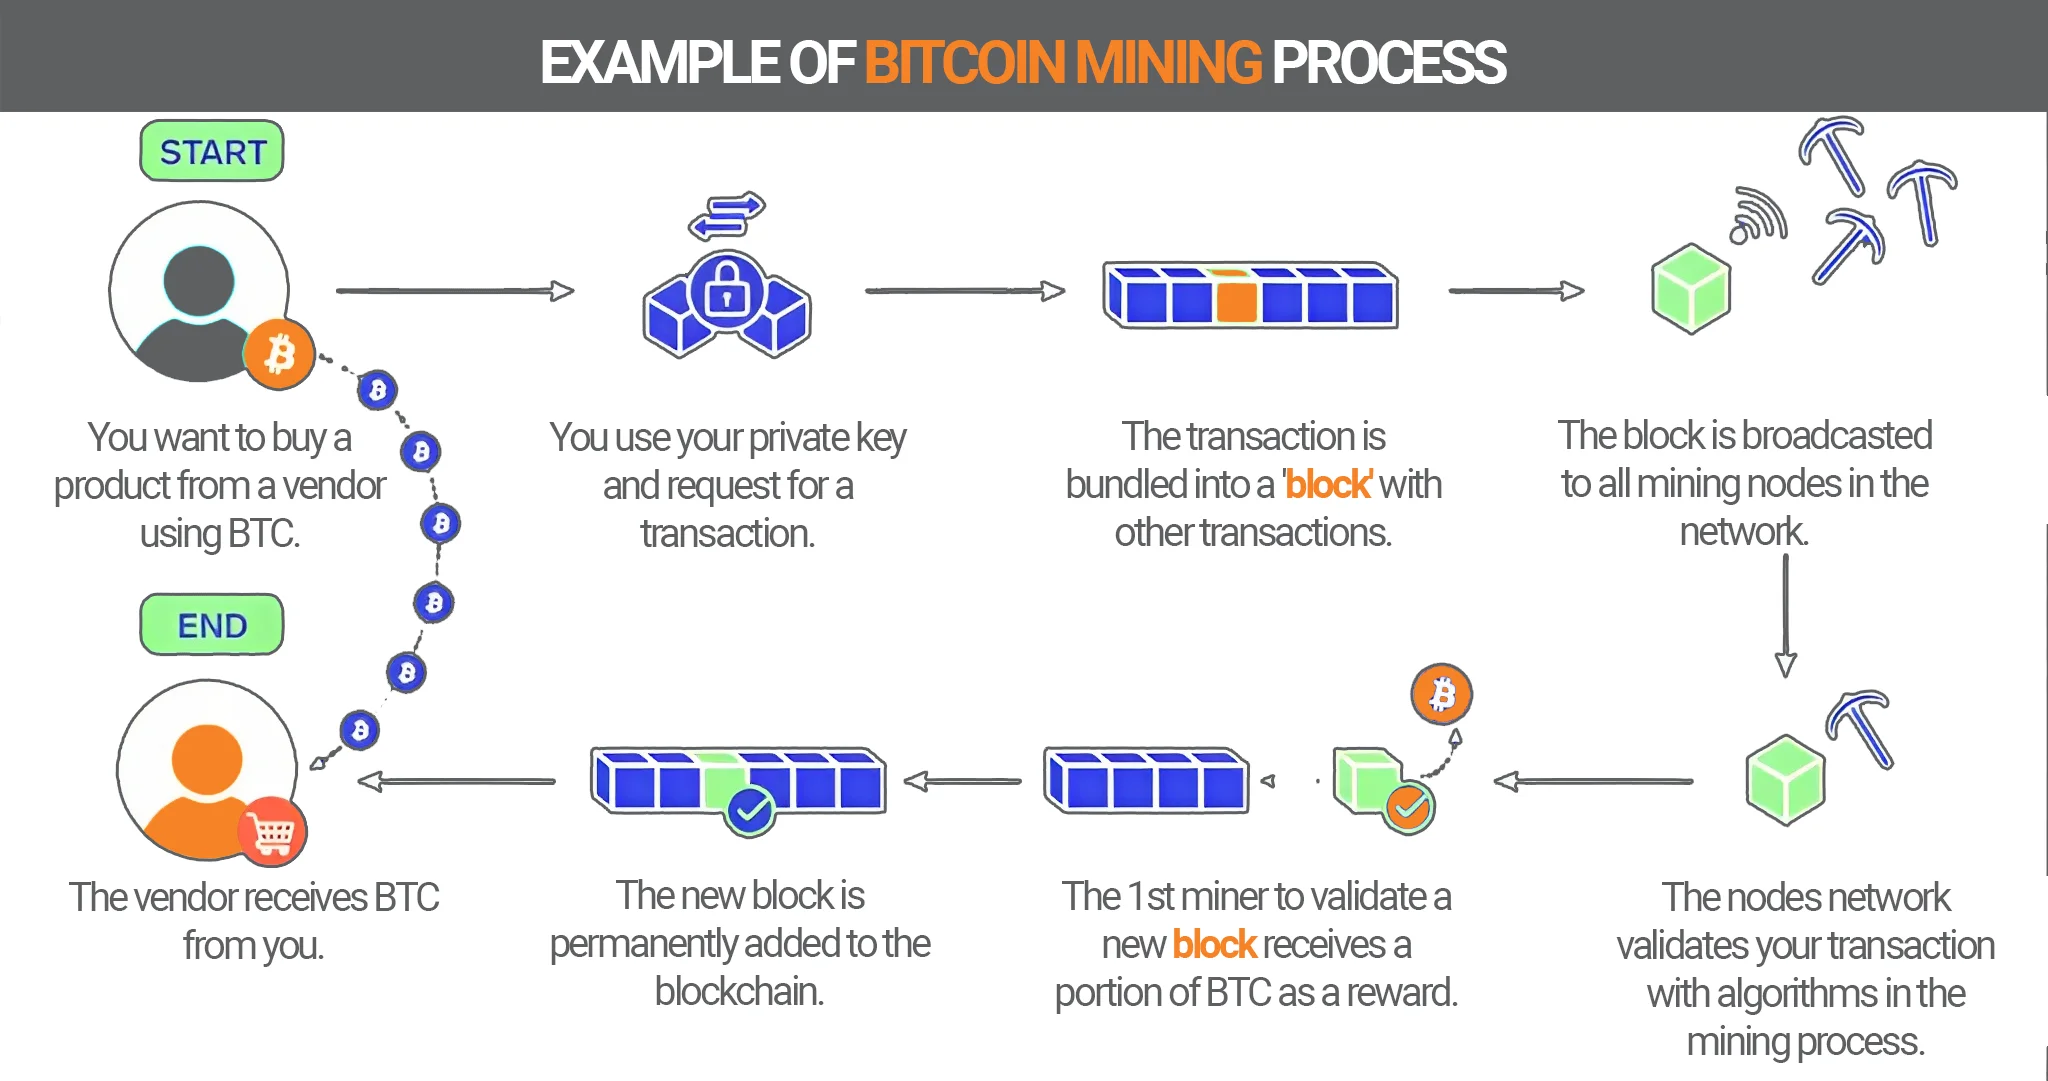 Mining process and transactions